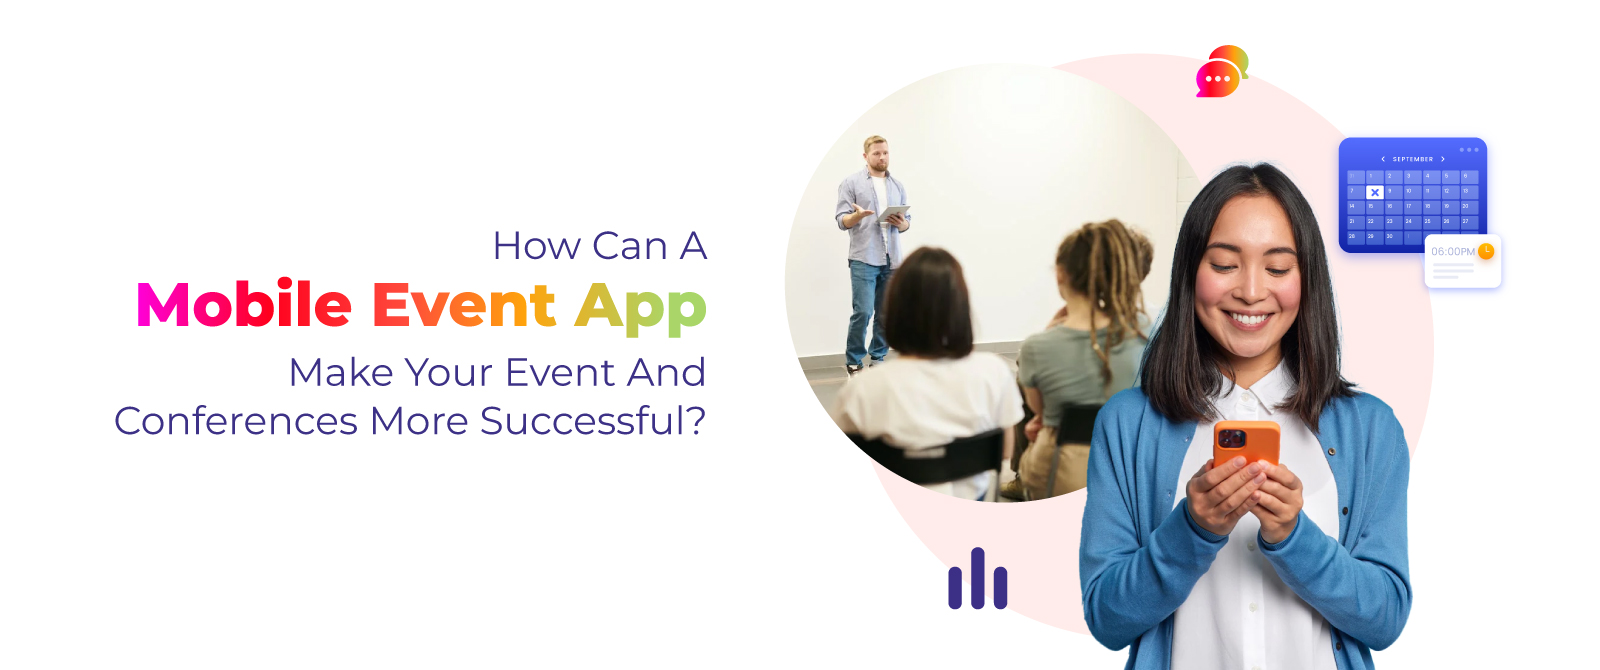 How Can A Mobile Event App Come in Handy for Successful Event And Conferences?